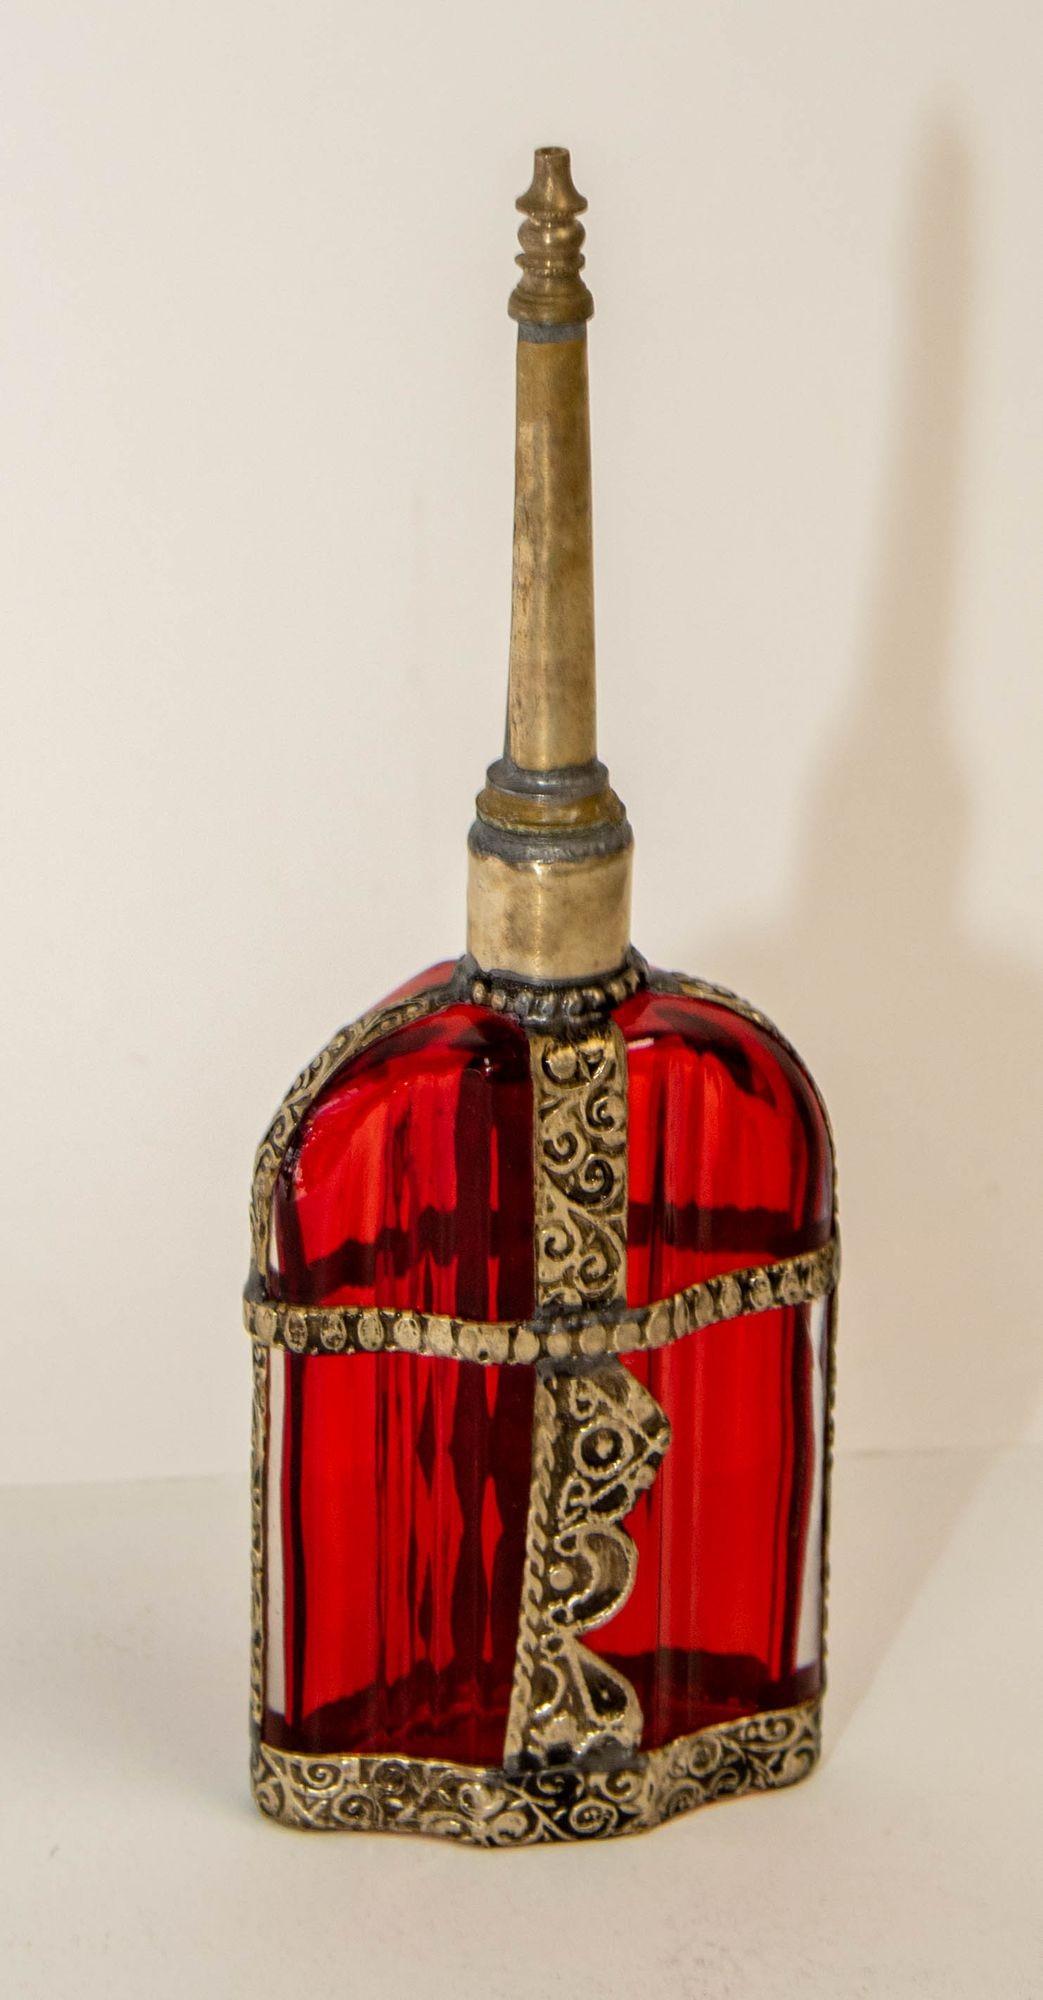 Moroccan Red Glass Perfume Bottle Sprinkler with Embossed Metal Overlay.
Handcrafted Moroccan Moorish red glass perfume bottle or rose water sprinkler with raised embossed silvered metal floral design over red glass.
The pressed glass bottle in Art